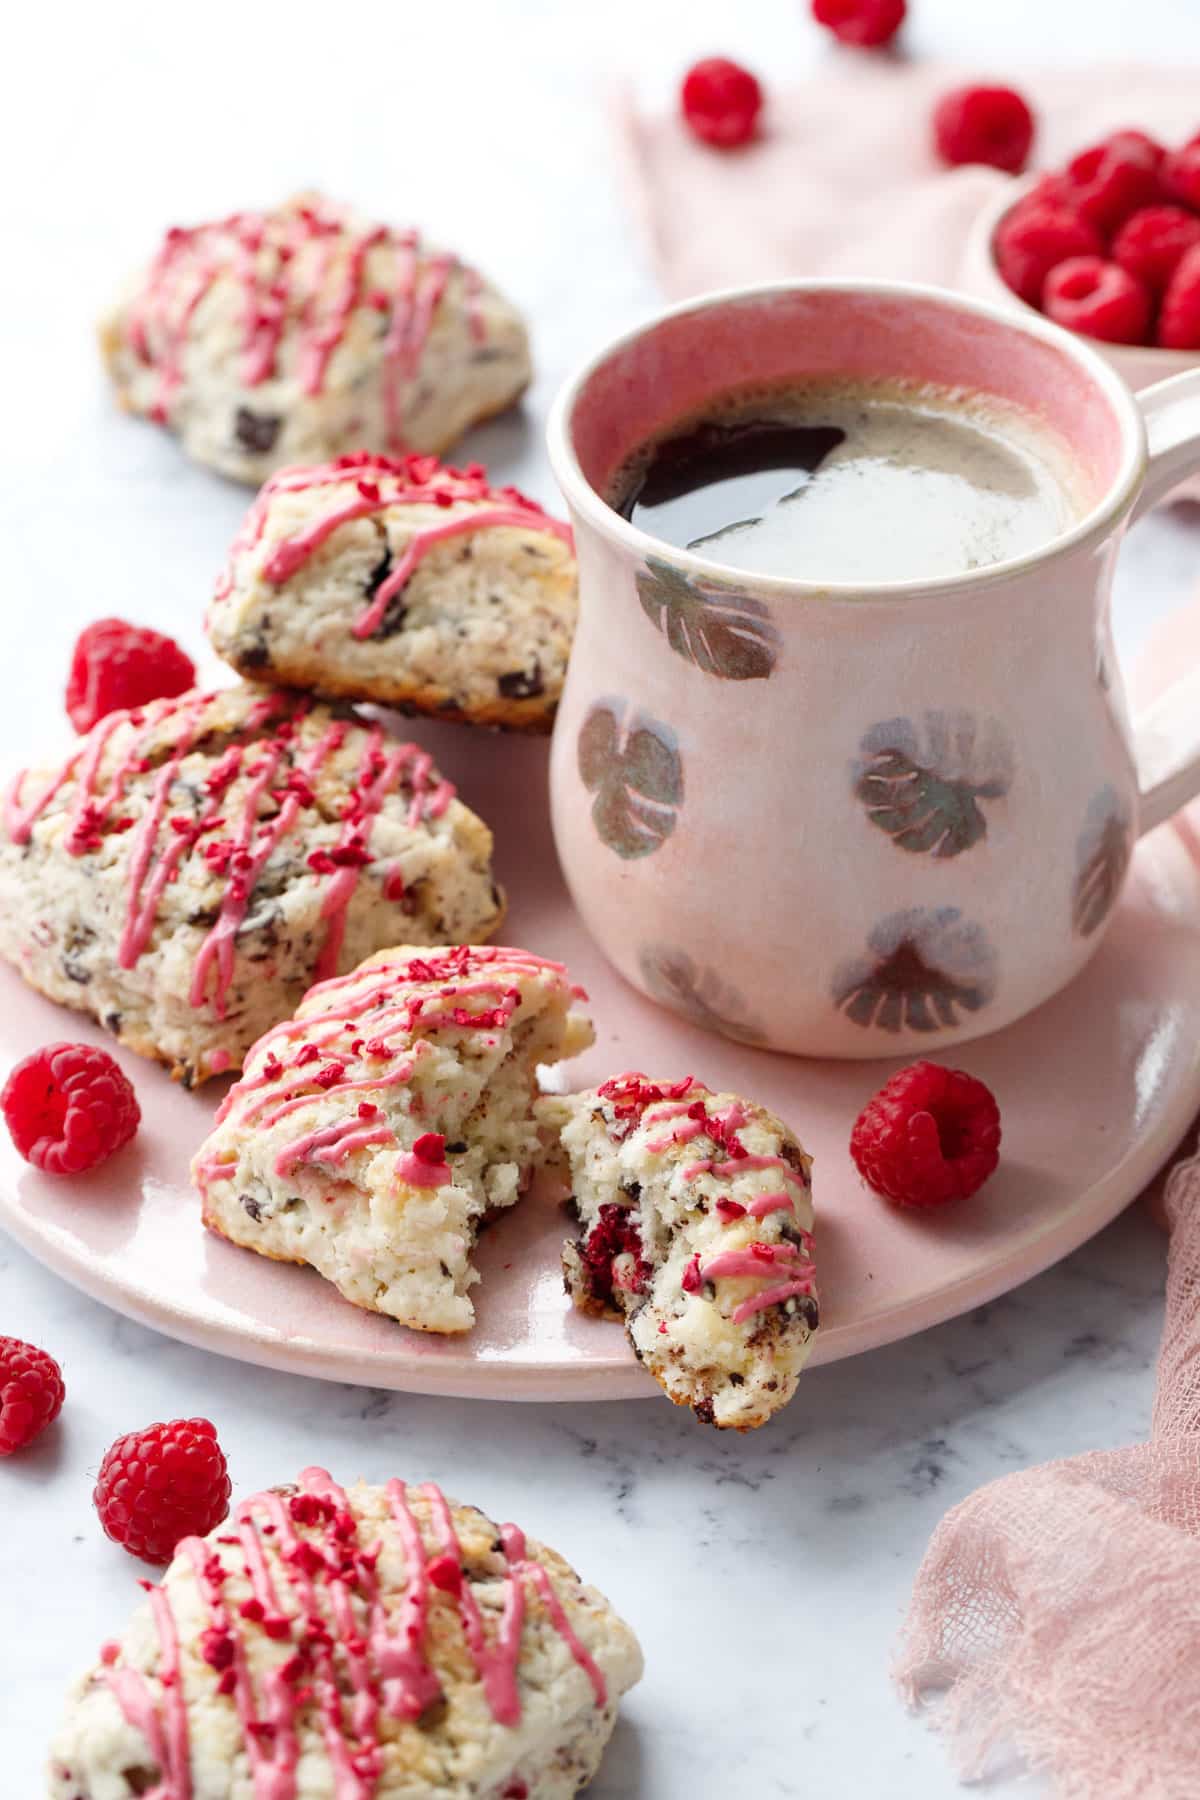 Pink serving plate with Dark Chocolate Raspberry Cream Scones and a homemade ceramic mug filled with coffee.